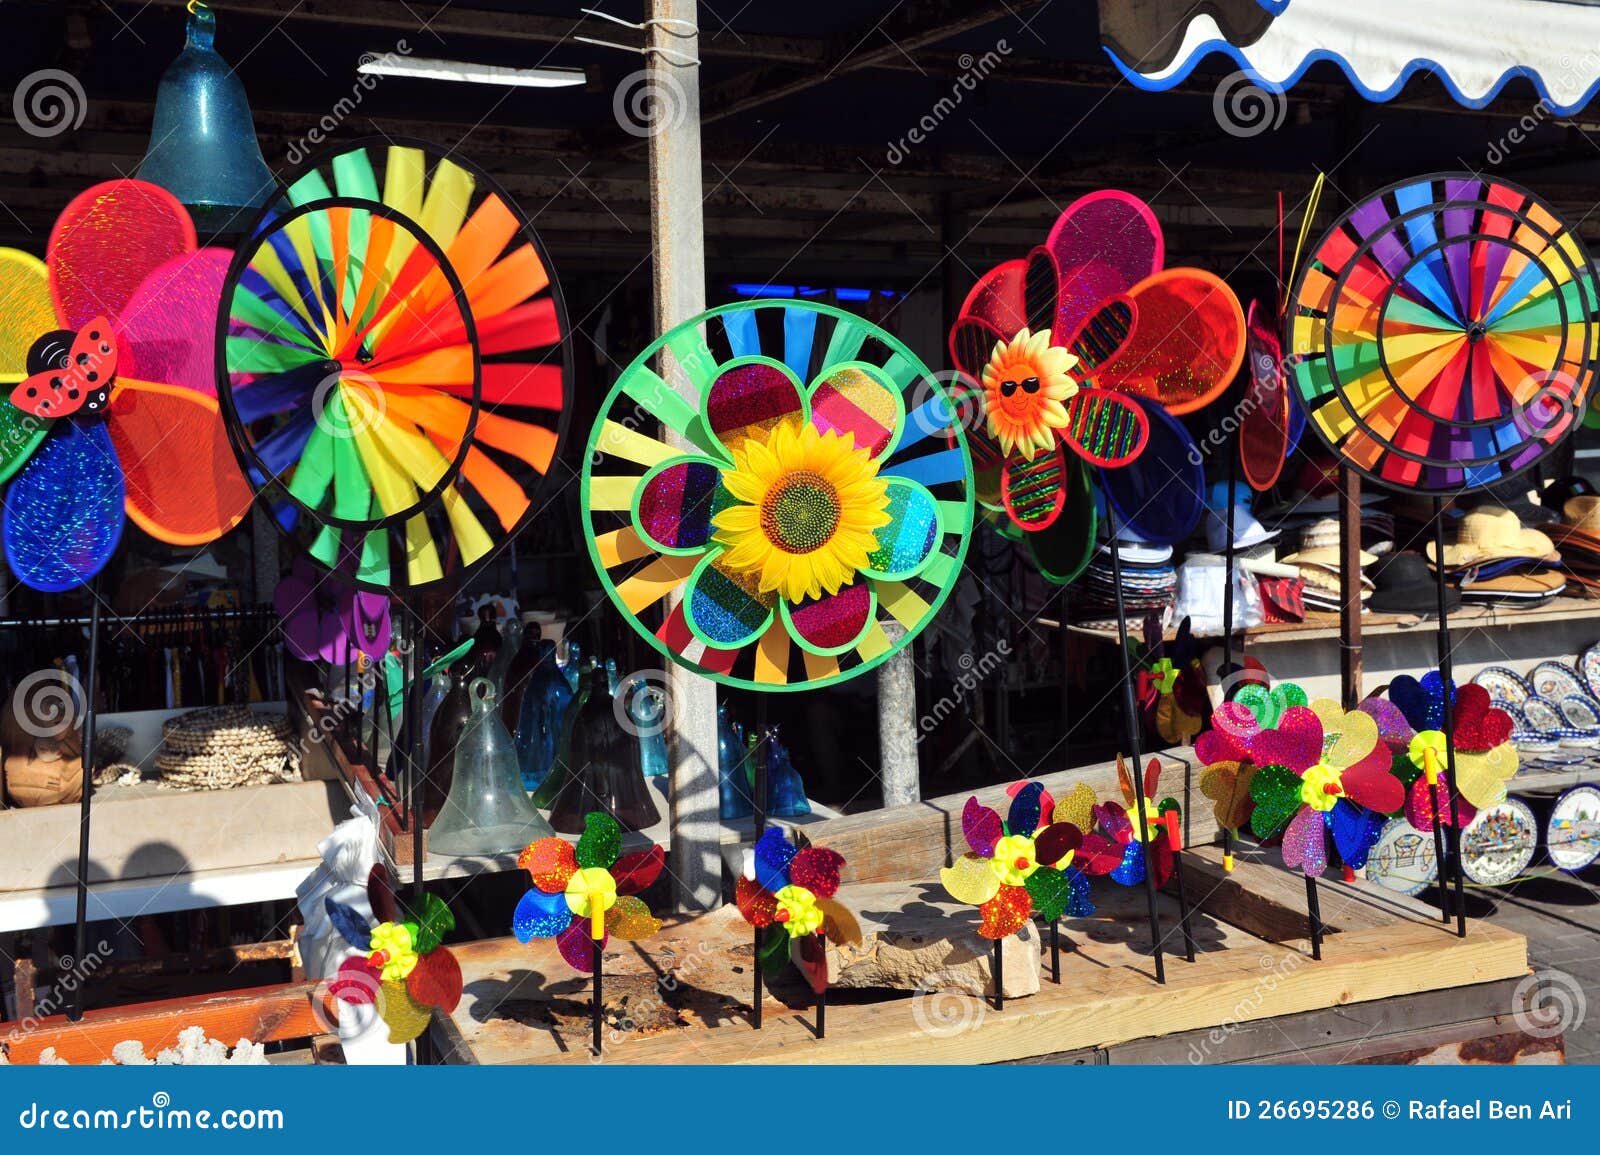 Children Toy Windmill Royalty Free Stock Image - Image: 26695286